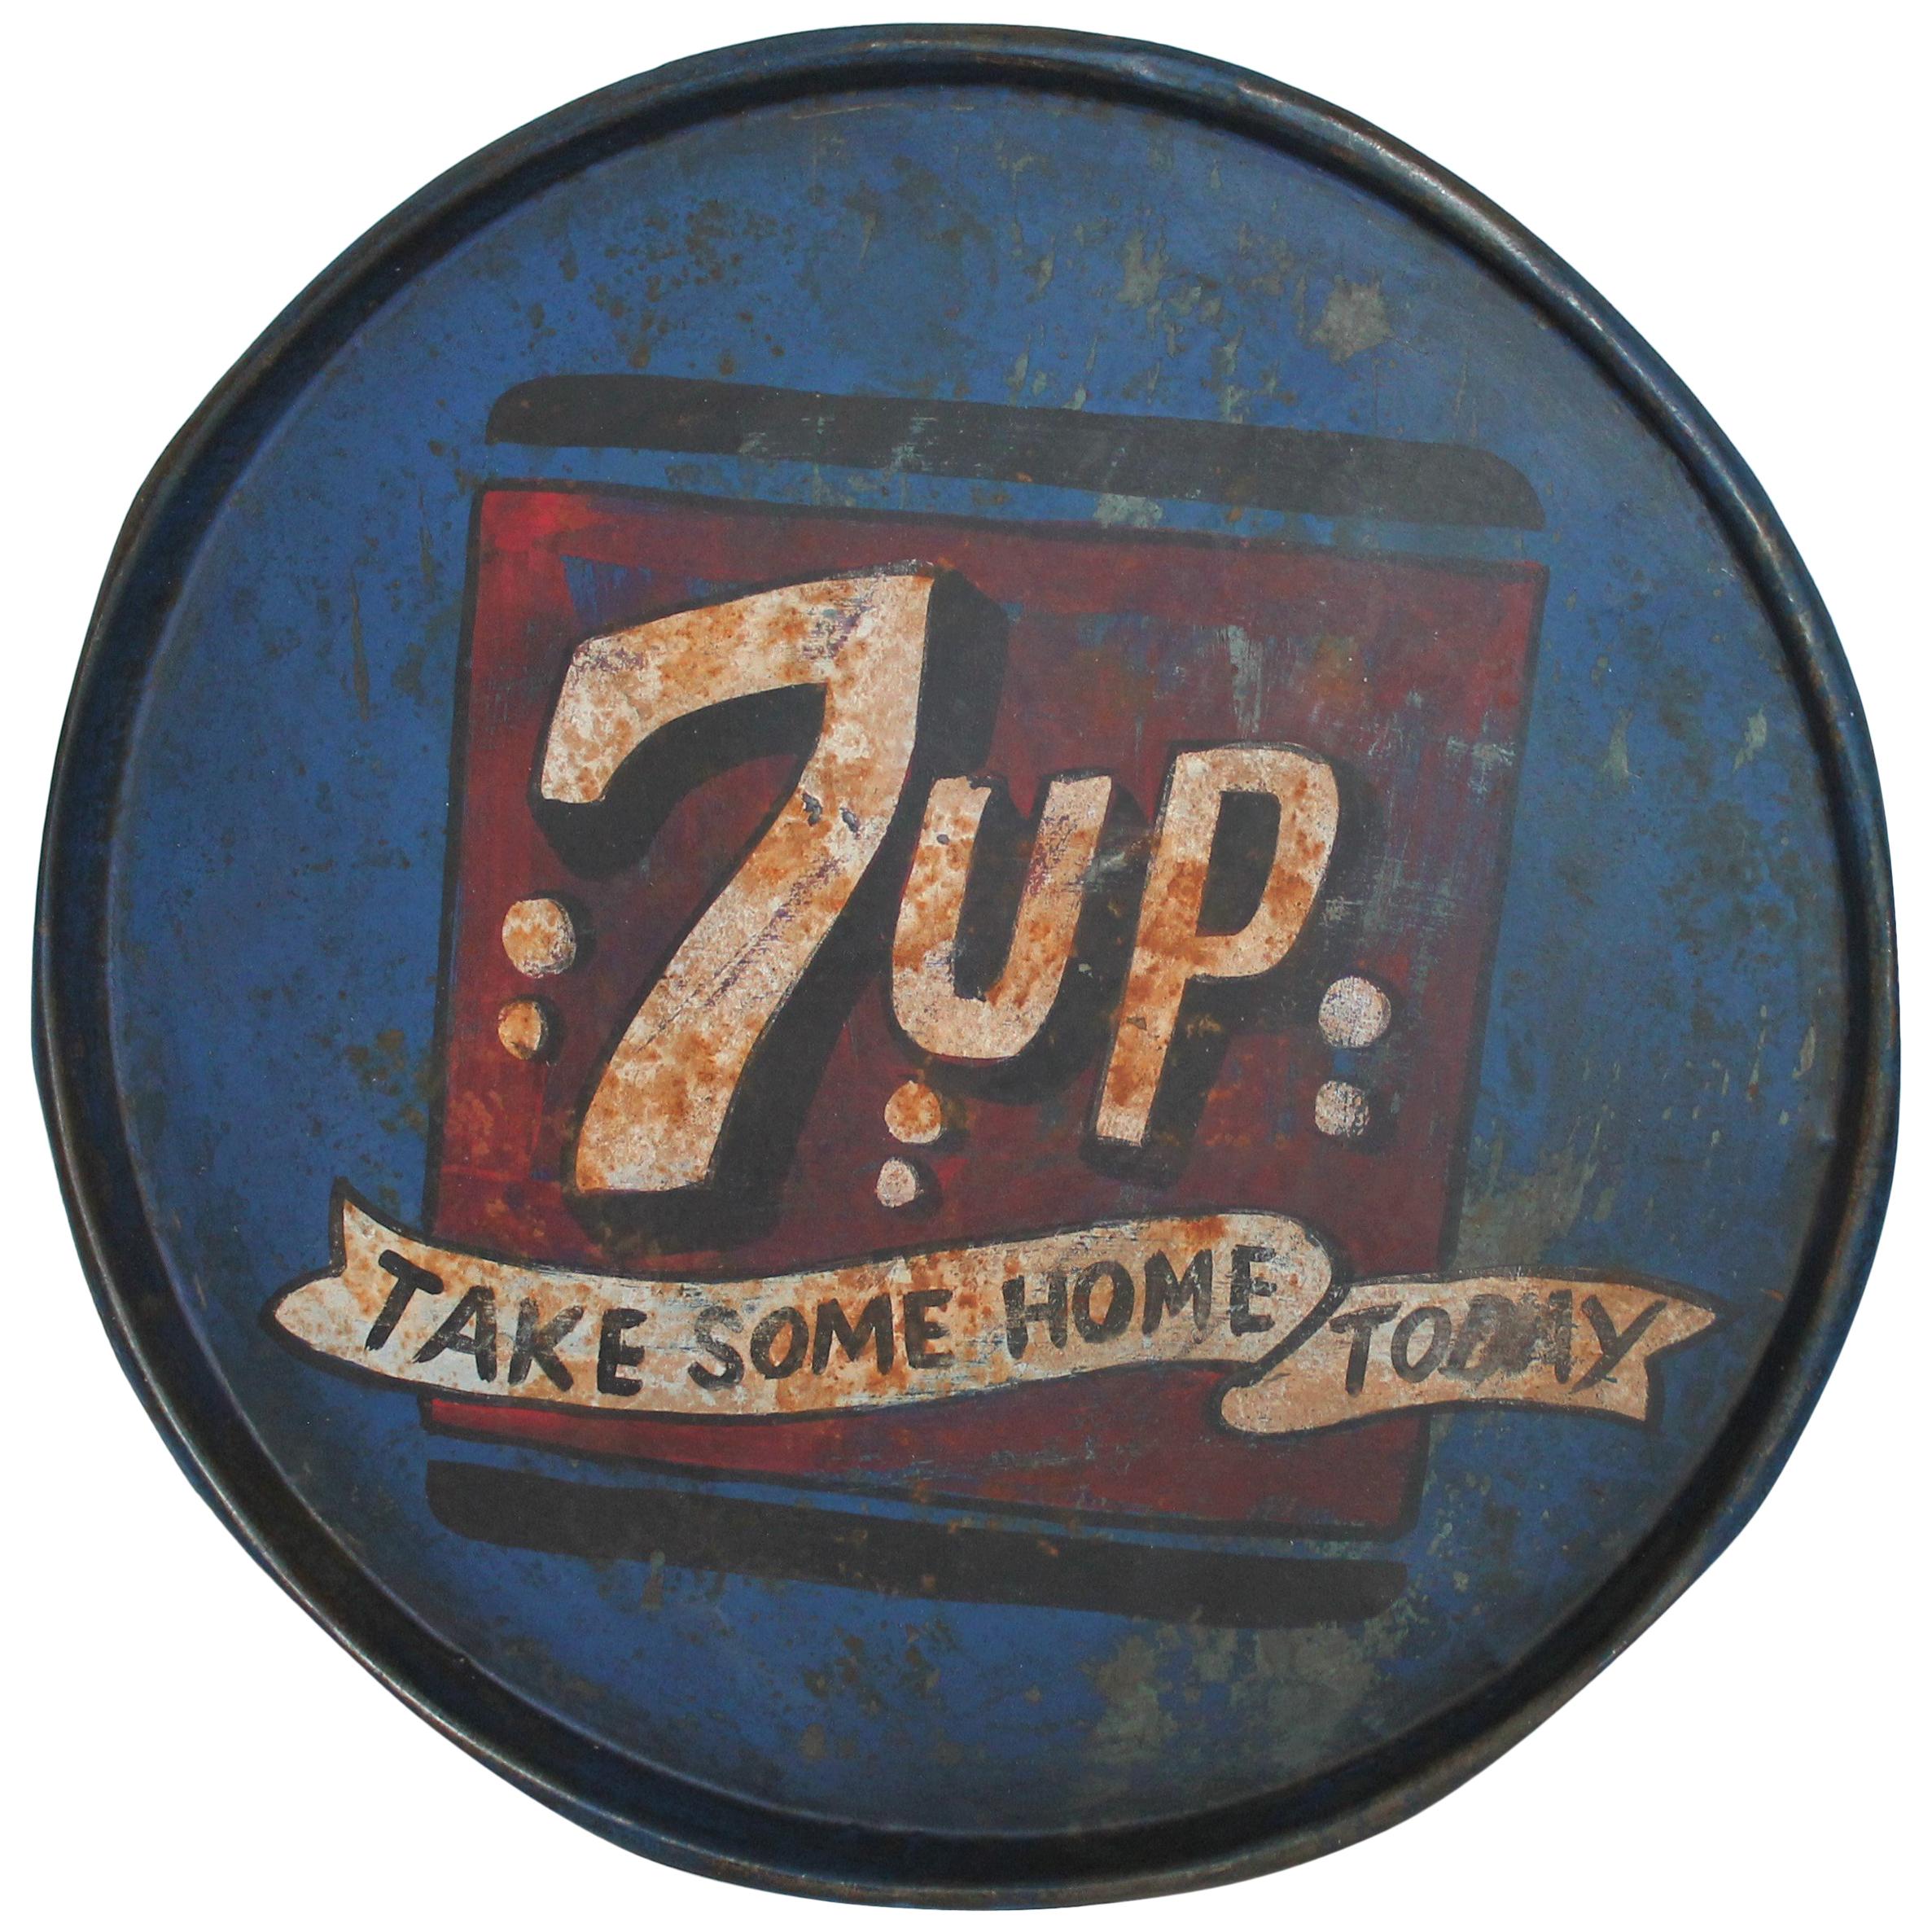 Vintage 7up Tray